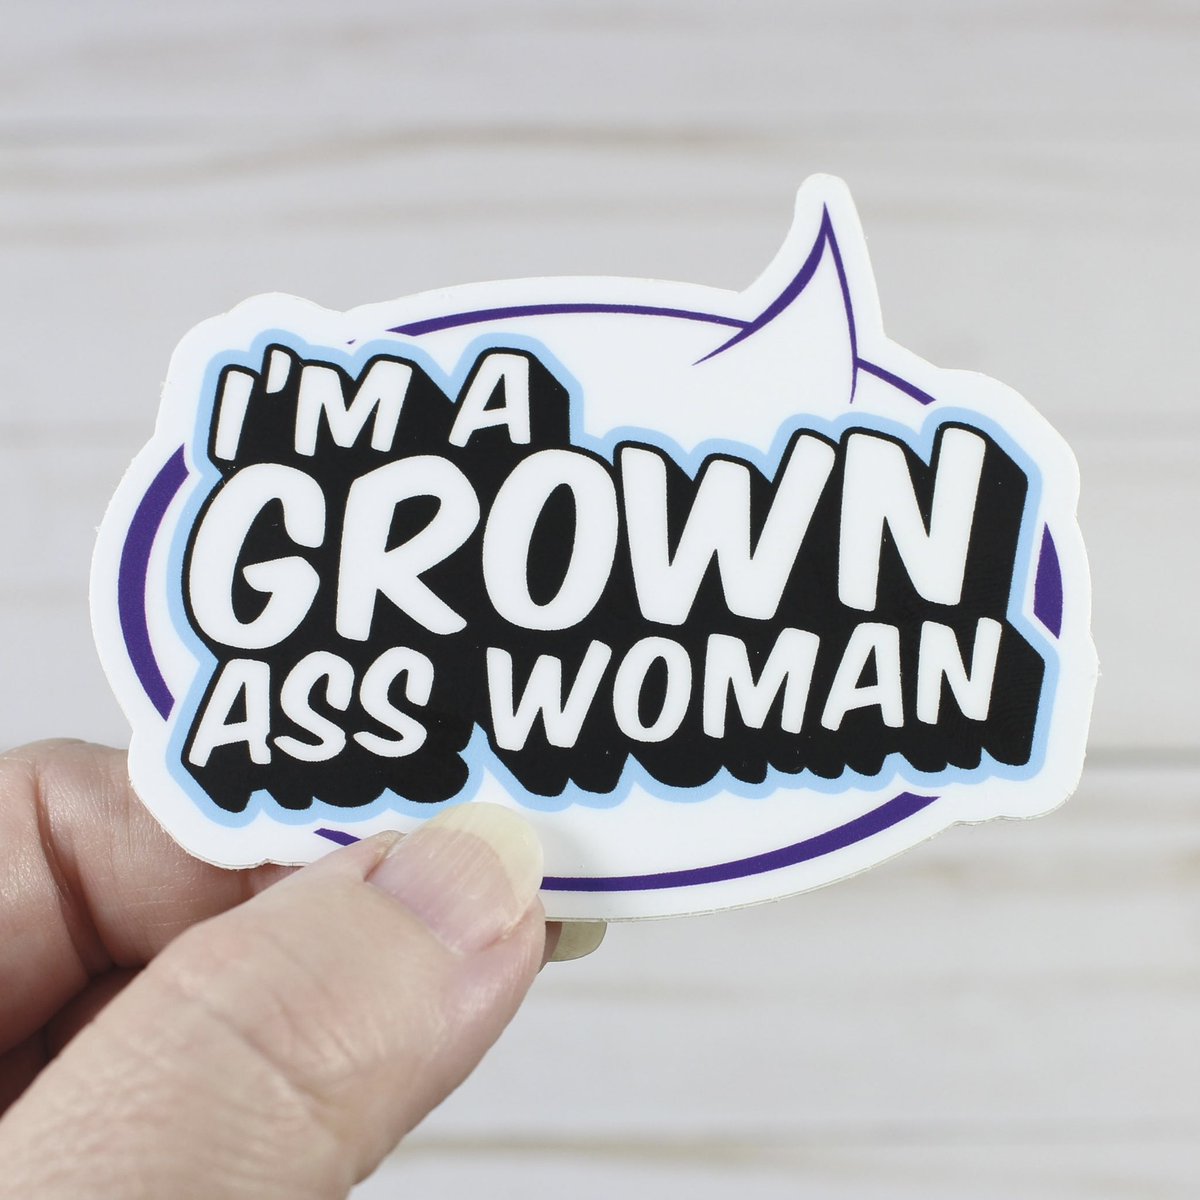 Wishing all the Grown Ass Women out there a wonderful kick-ass weekend!!!

#etsyshop #etsystore #etsyseller #stationeryshop #stickershop #plannerstickers #plannercommunity #slapstickers #stickers #grownasswoman